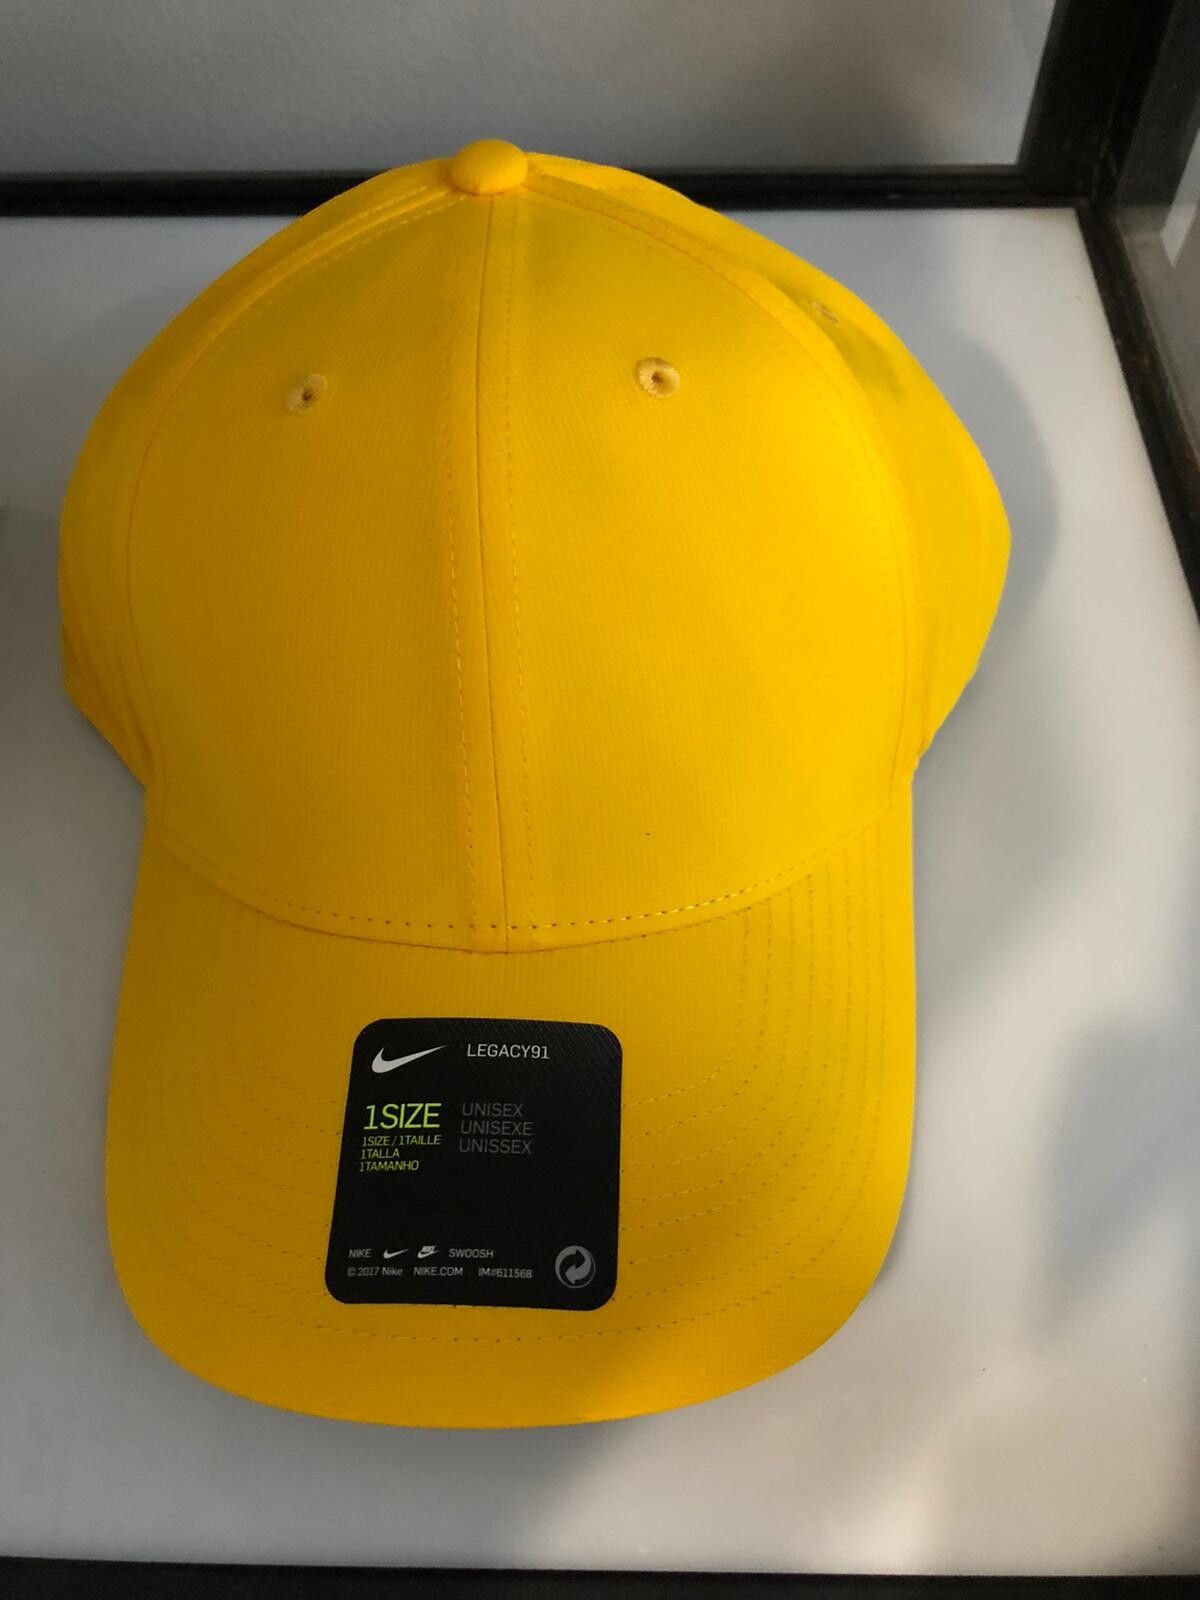 Nike New Nike men's Dri-FIT Tech Adjustable yellow Golf Hat Size ONE SIZE - 1 Preview